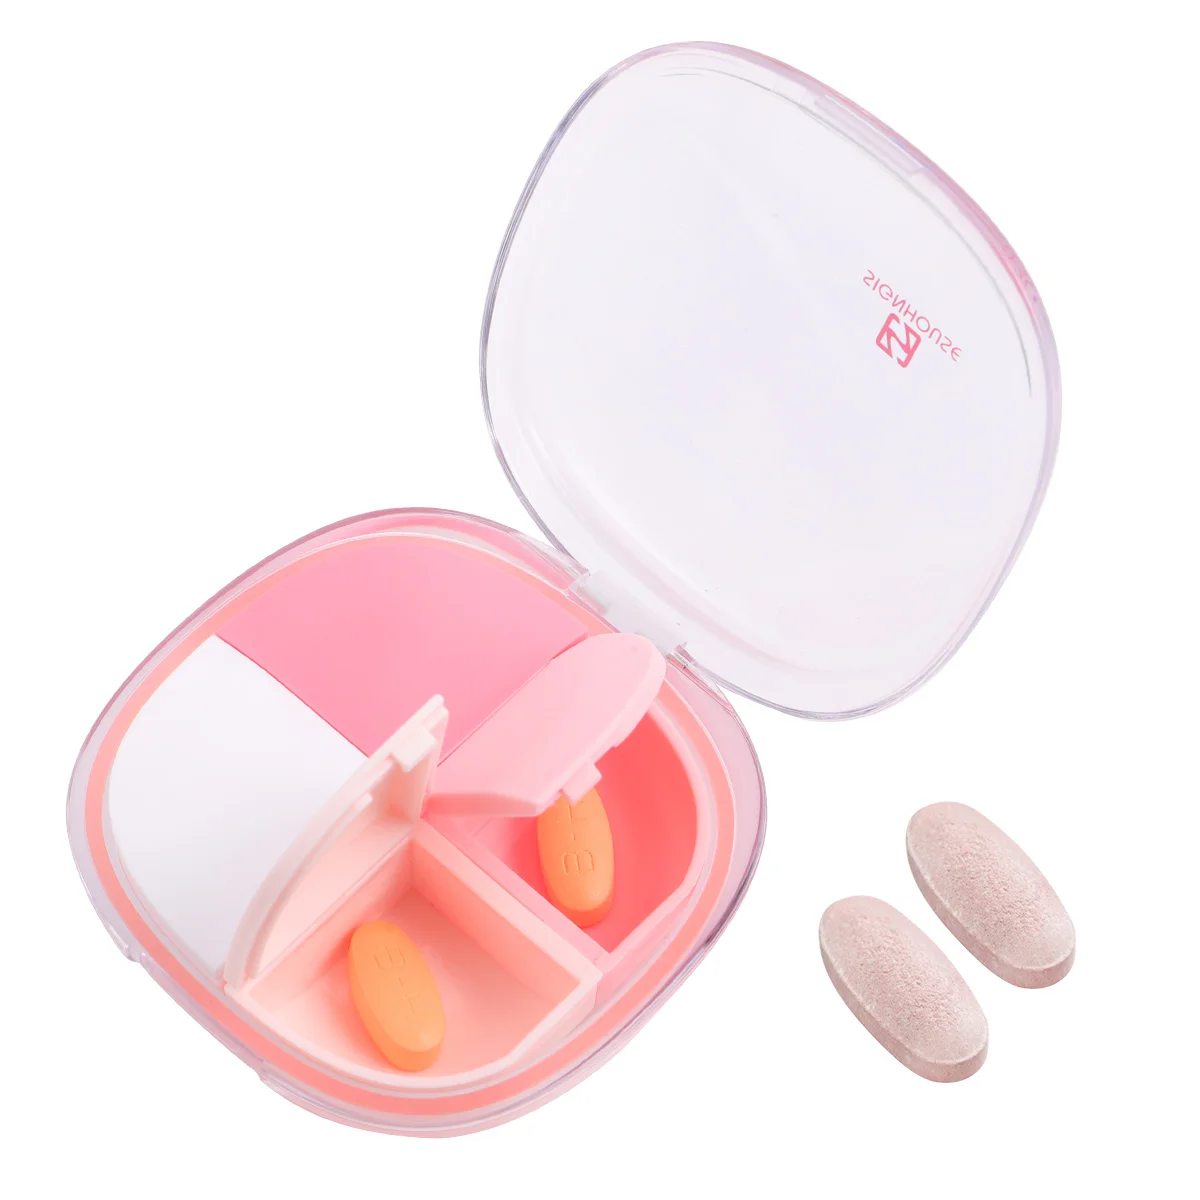 

4 Compartments Medicine Box Travel Kit Pill Container Case Carry Pocket Holder Storage Pp